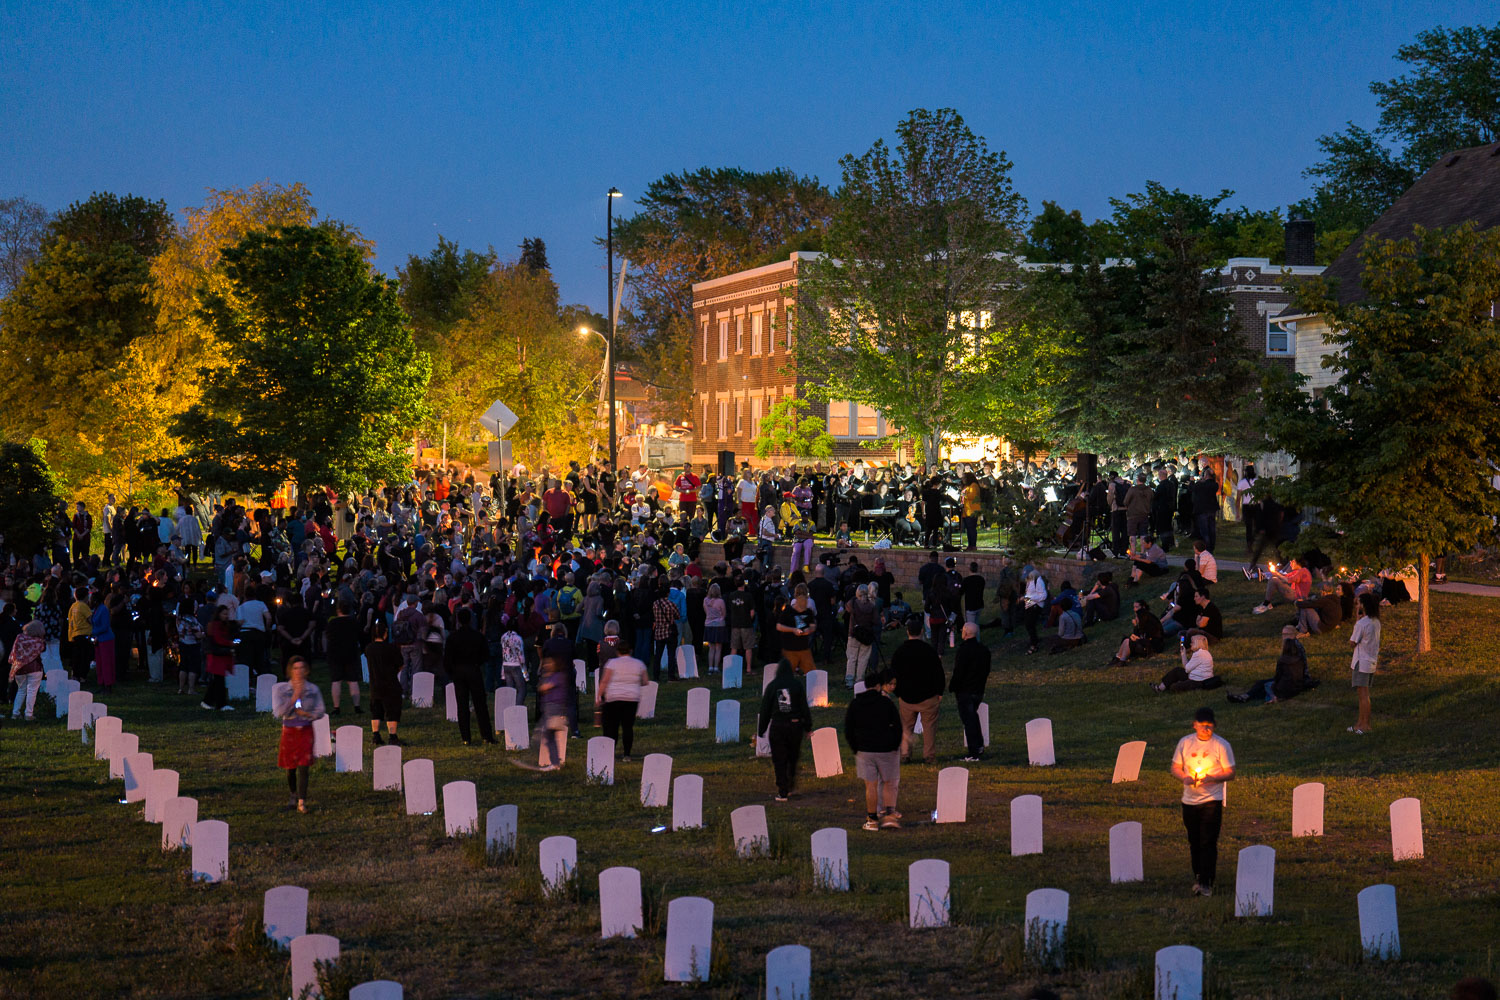 Members of the Minnesota Orchestra performing parts of "Brea(d)th" at George Floyd Square/Say Their Names Cemetery on Thursday night, the 3 year anniversary of George Floyd's murder.